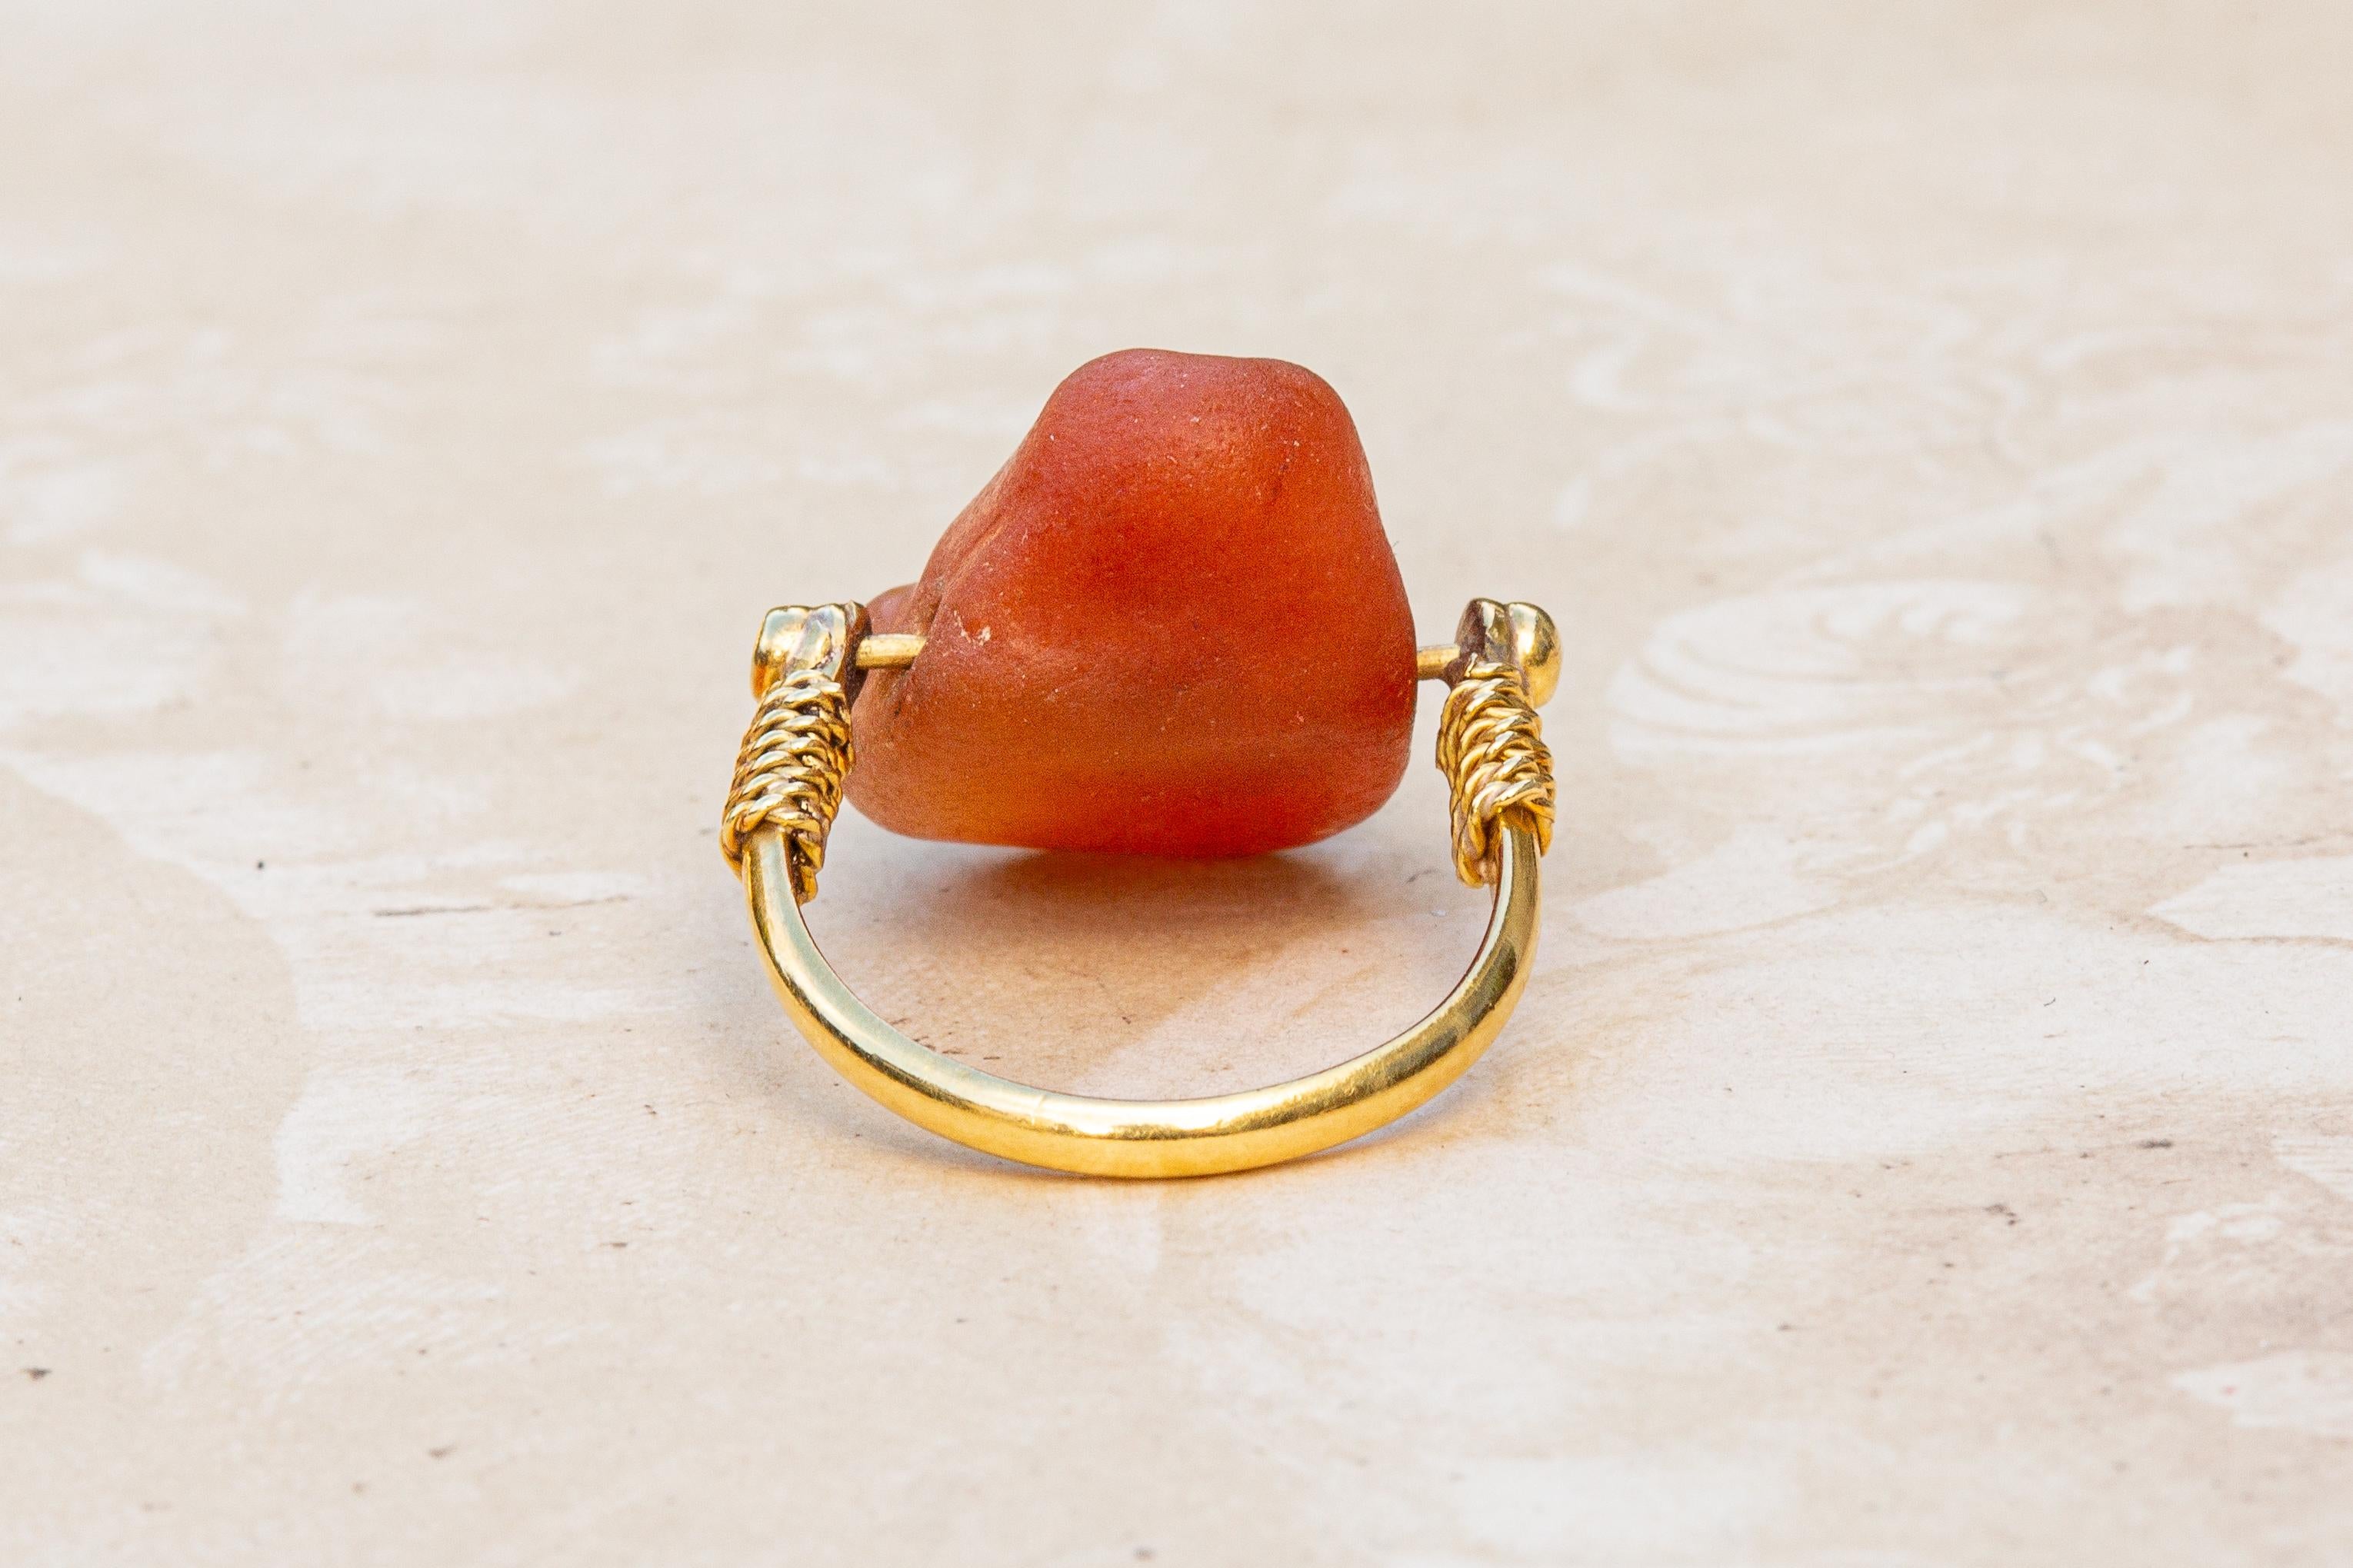 Cabochon Rare Ancient Egyptian Carved Carnelian Frog Amulet Swivel Ring 18th Dynasty For Sale